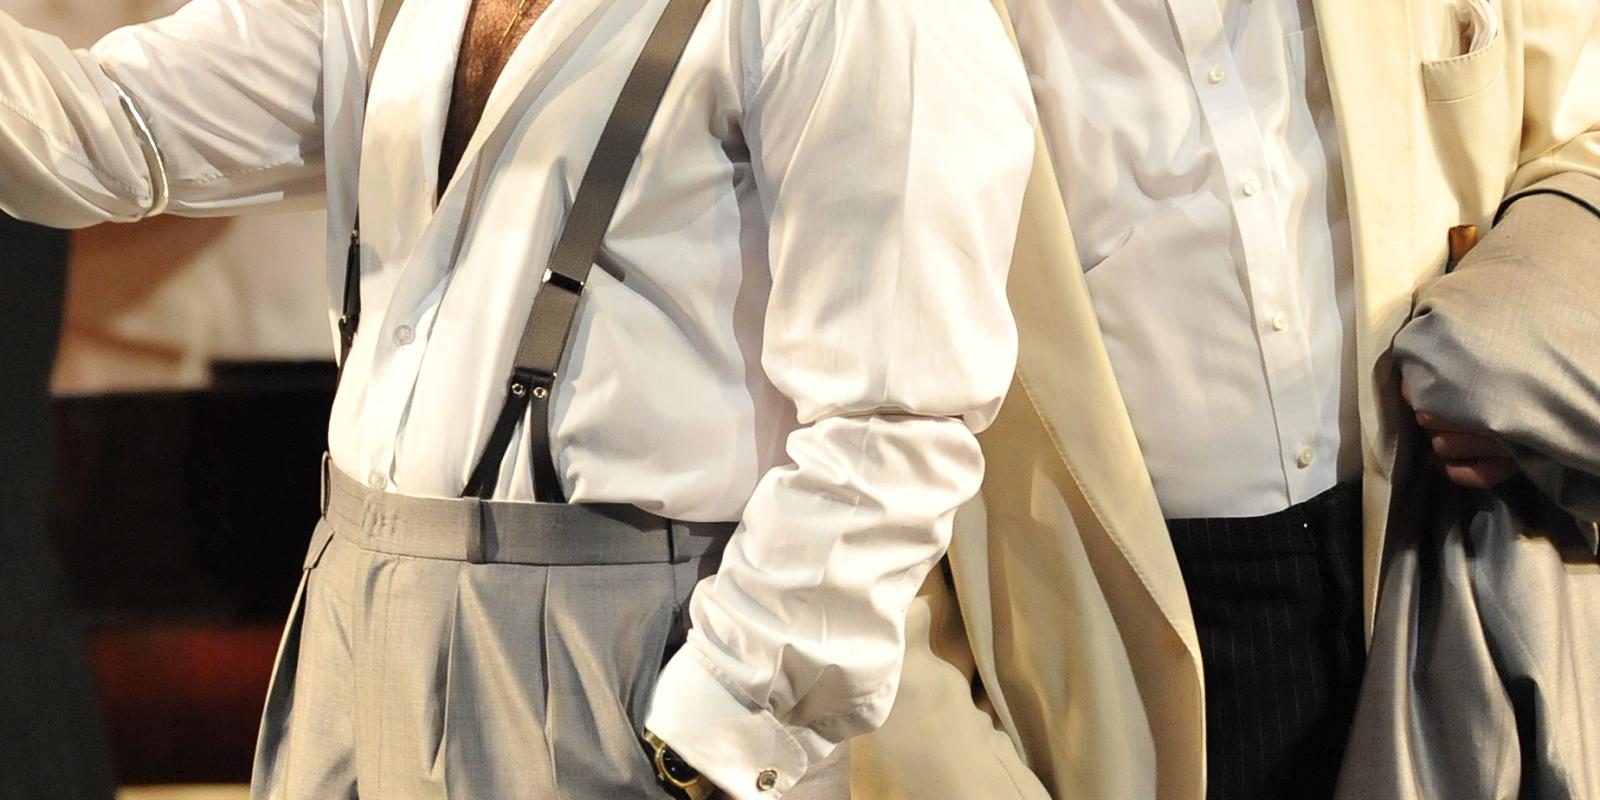 Rigoletto's Michael Fabiano and Anthony Michaels Moore's white suits